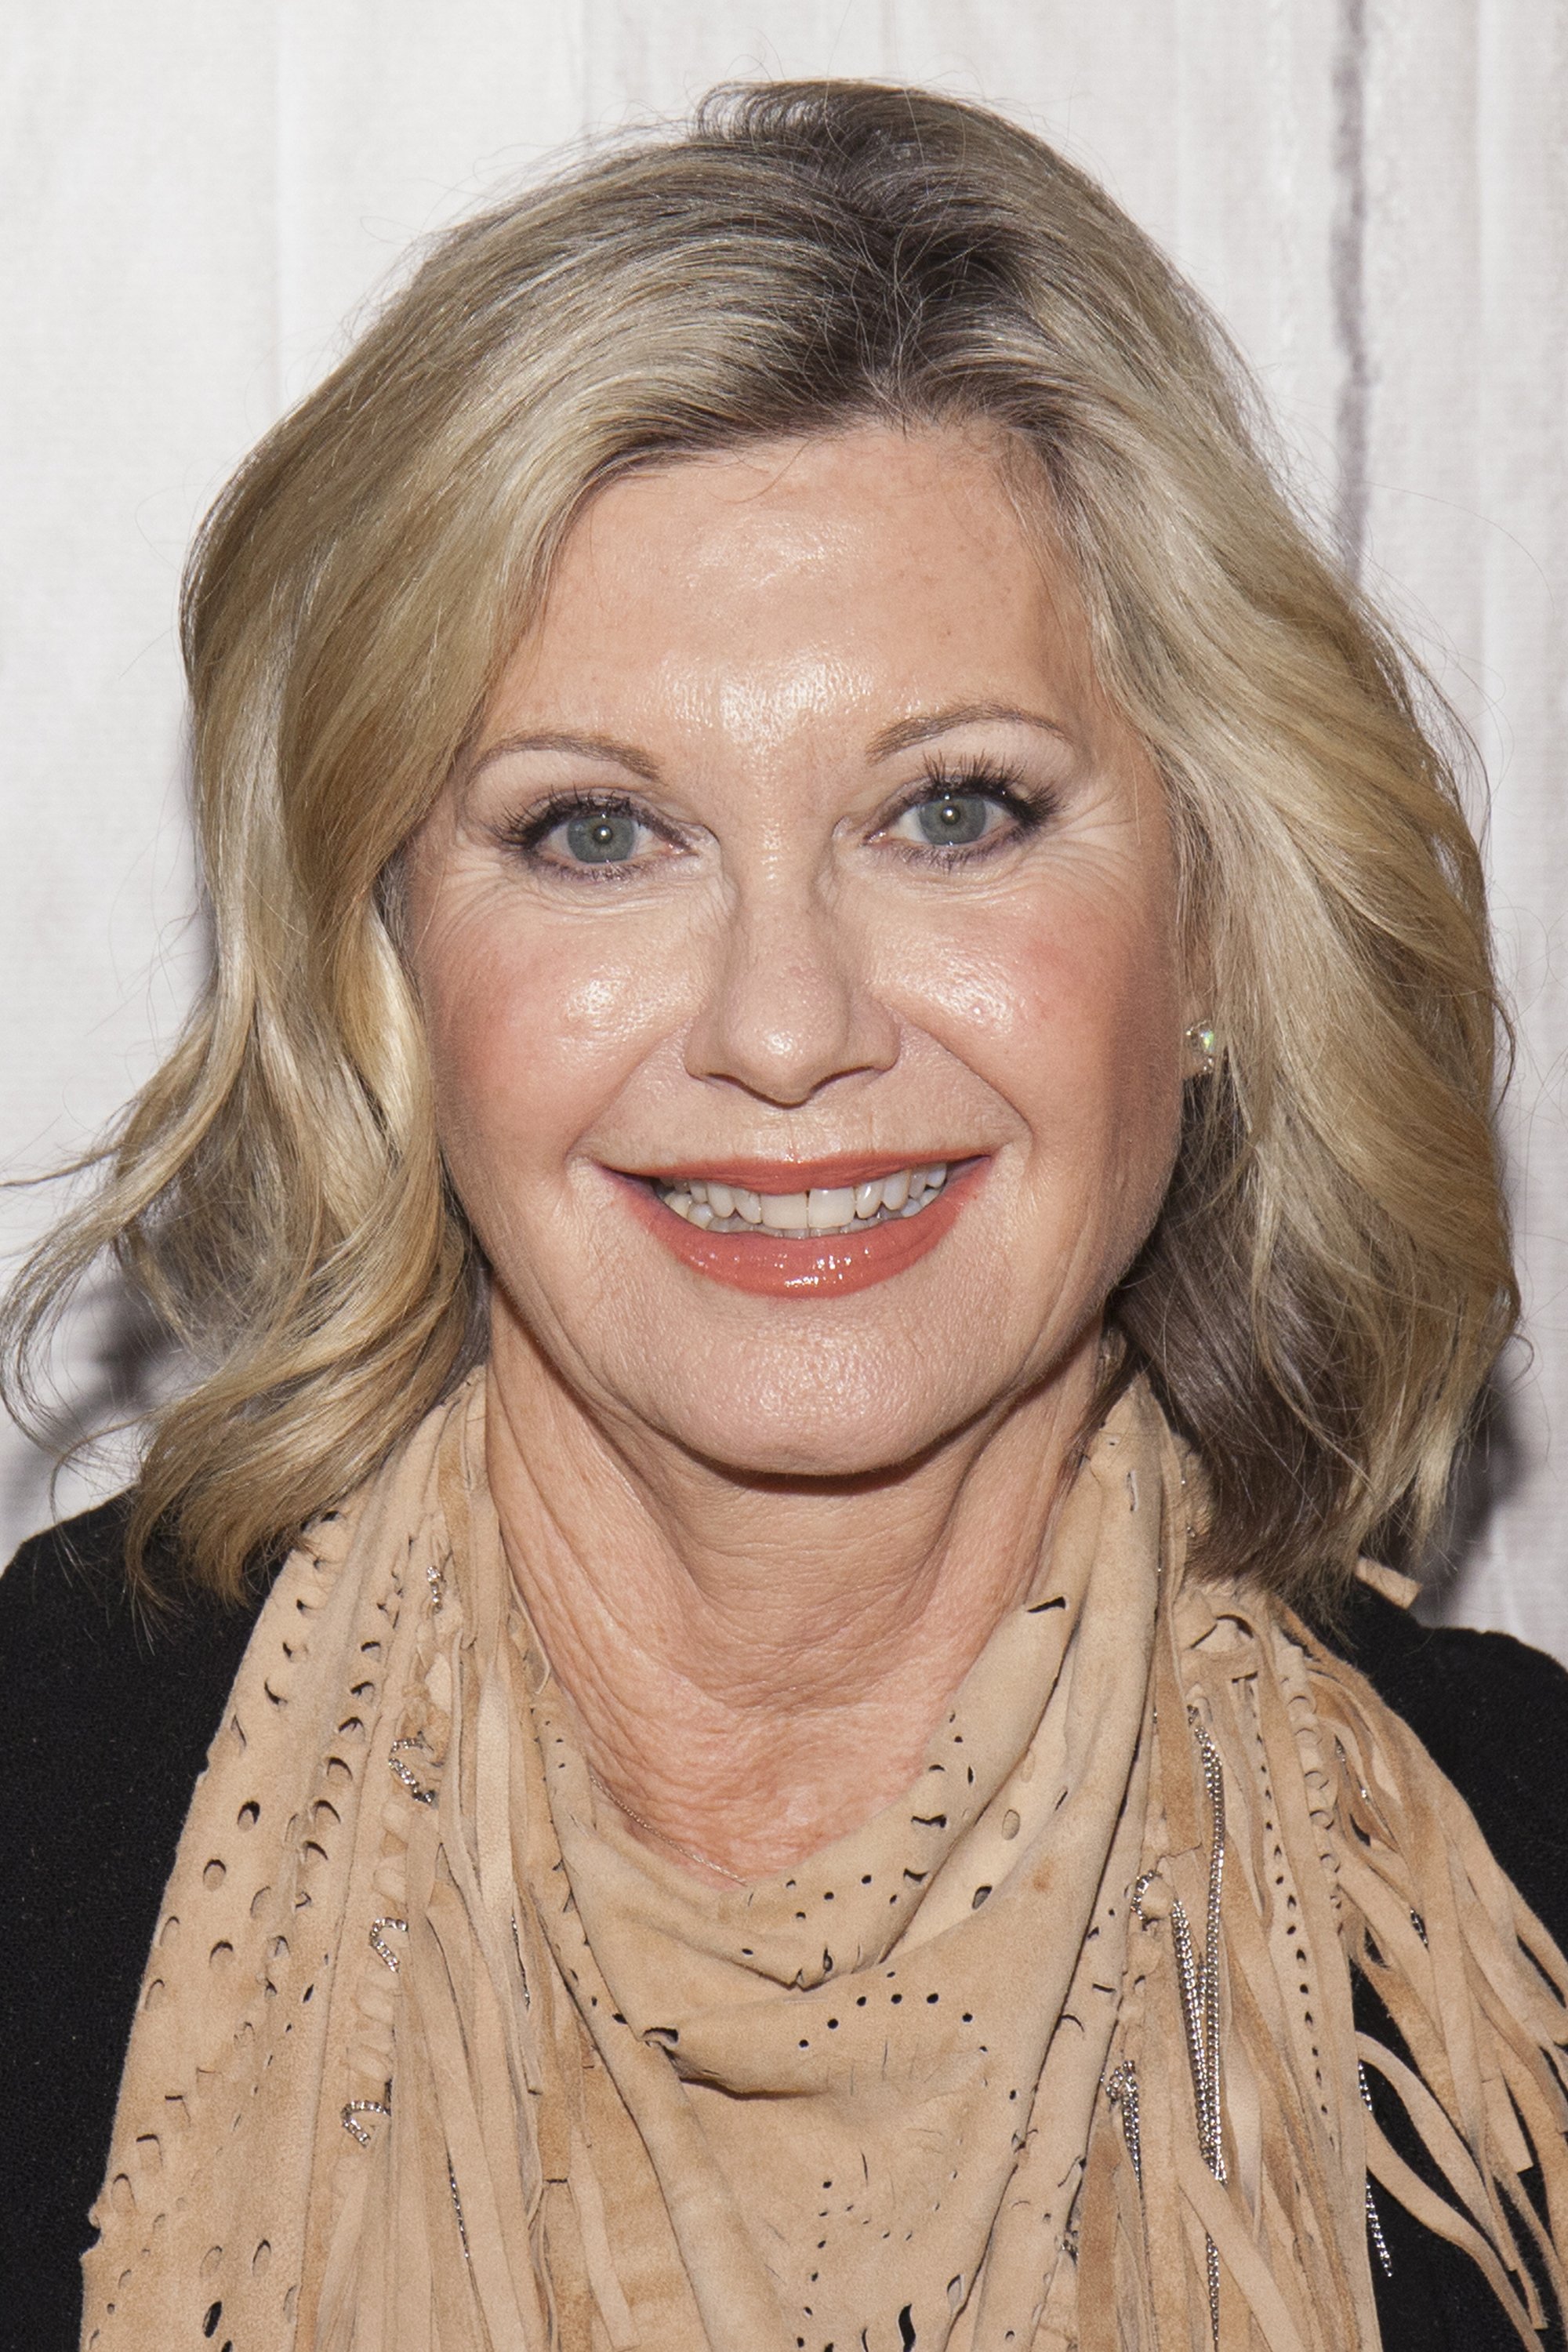 Olivia Newton-John attends The Build Series Presents Olivia Newton-John, Amy Sky, And Beth Nielsen Chapman Discussing The New Project "LIV ON" at AOL HQ on October 3, 2016, in New York City. | Source: Getty Images